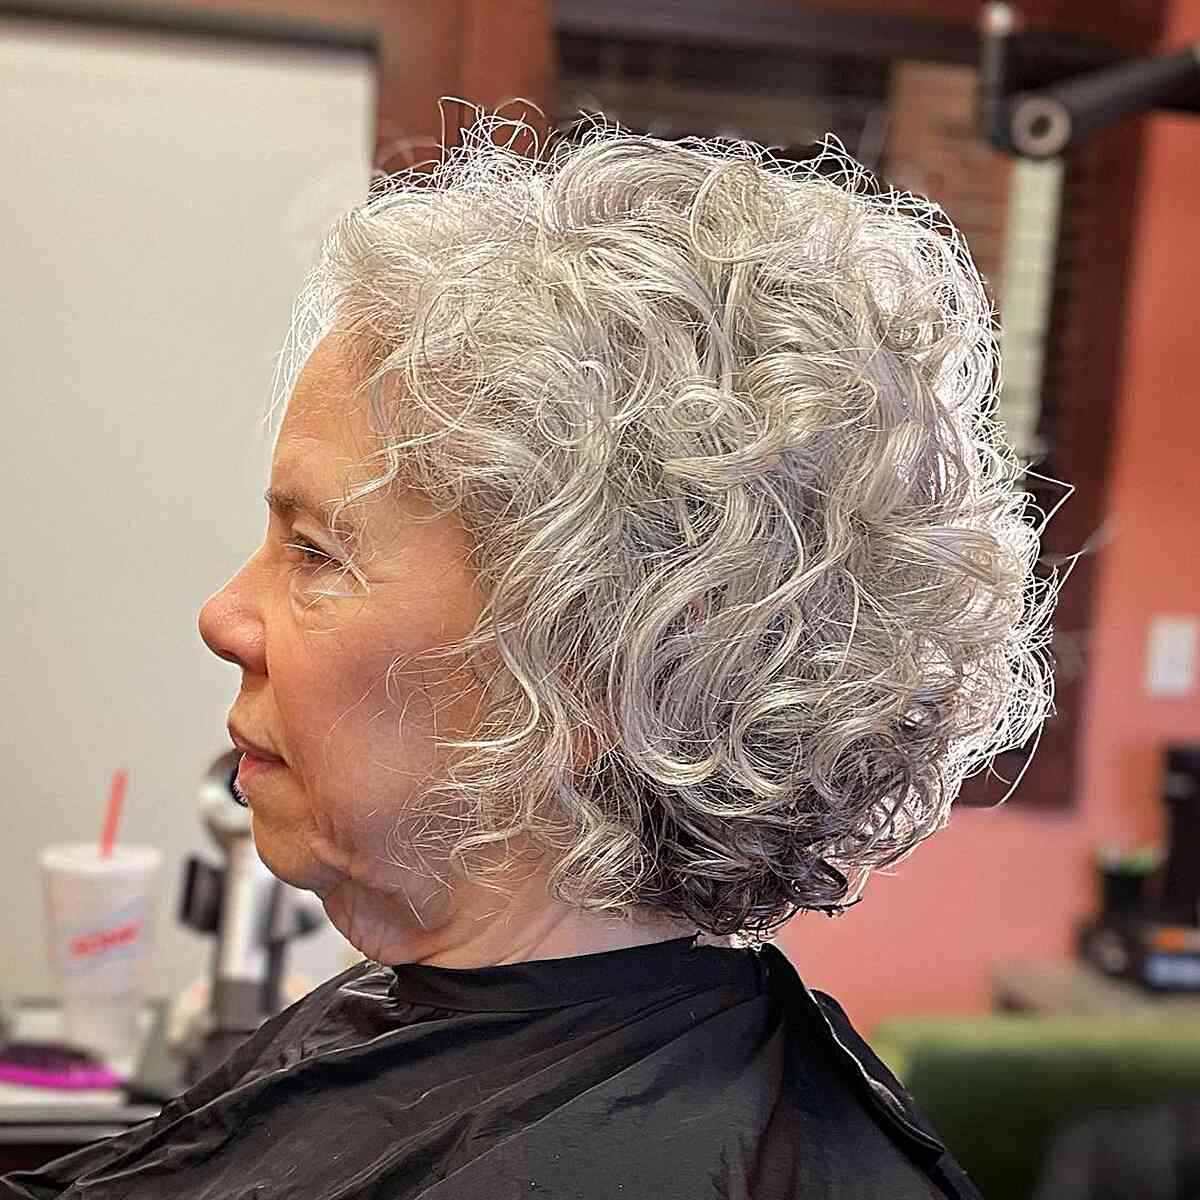 Chin-Length Wash-and-Wear Curled Silver Bob on ladies over 60